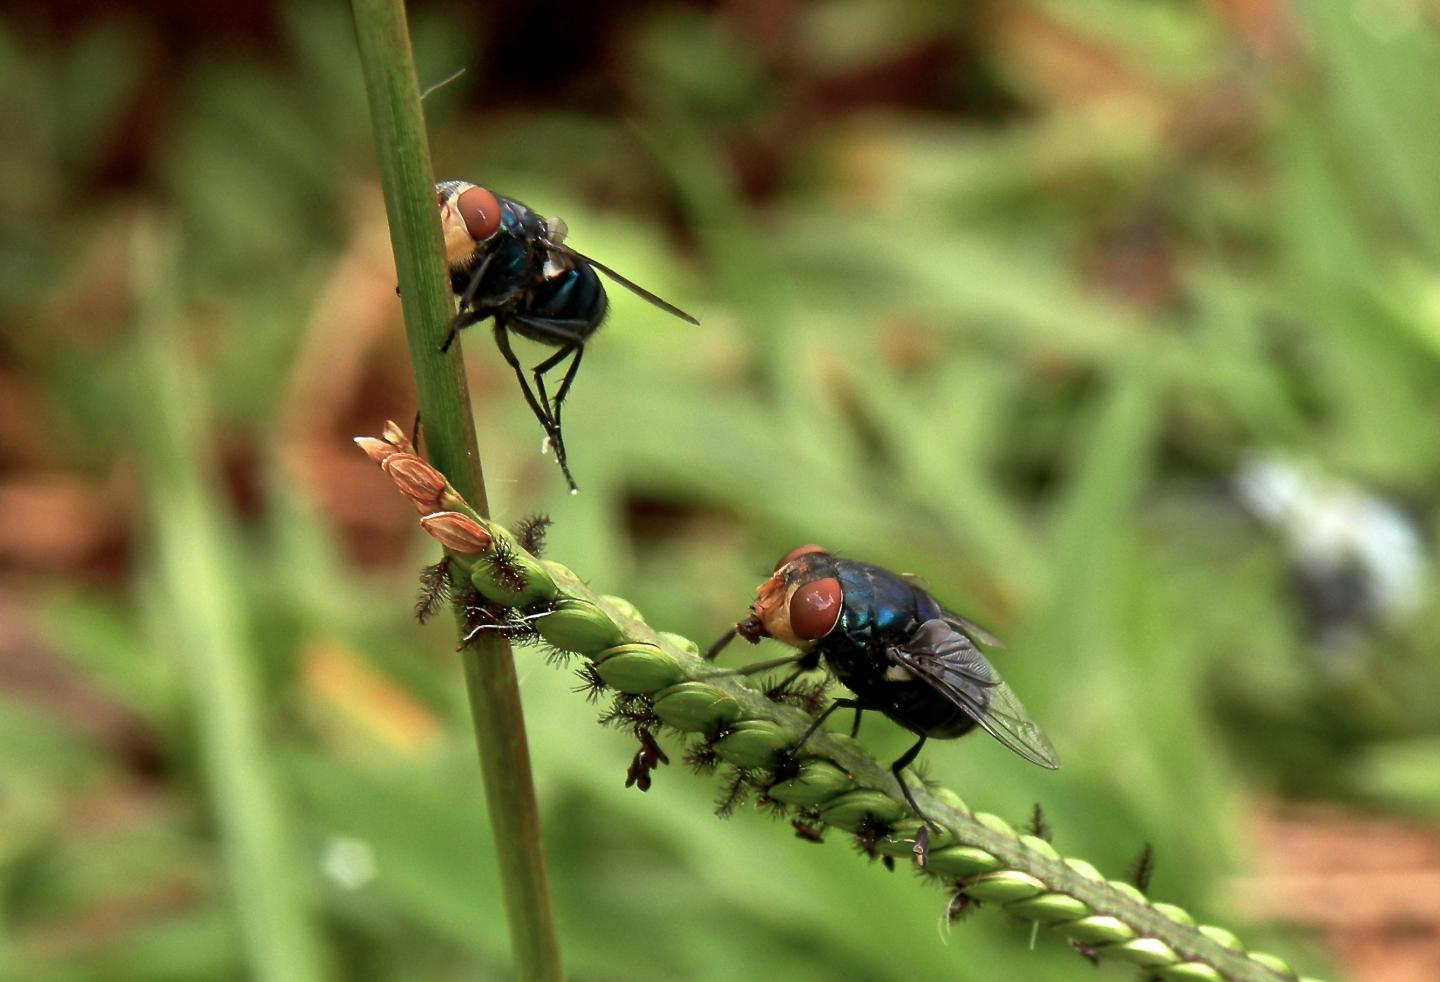 Blowflies and Houseflies Can Carry Hundreds of Bacteria Species